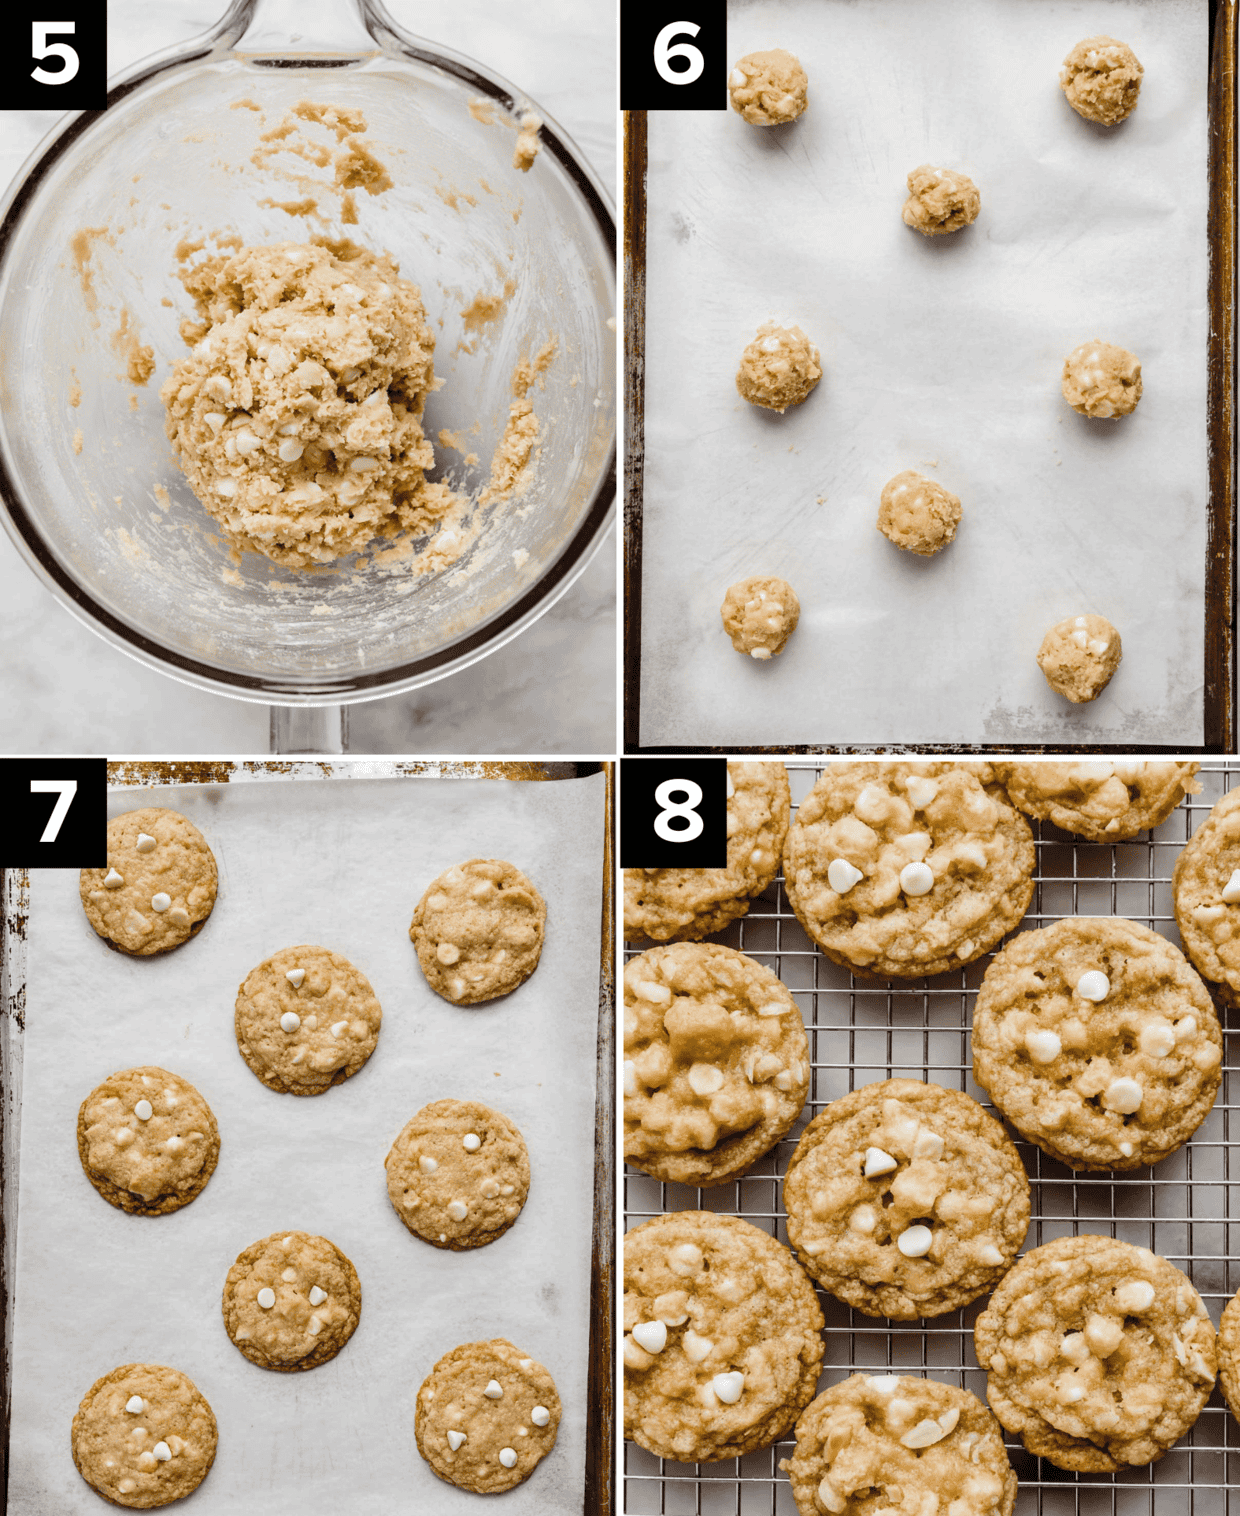 Top left image is White Chocolate Macadamia Nut Cookie dough in a glass bowl, top right is macadamia nut white chocolate chip cookie balls on a baking sheet, bottom left photo is baked white chocolate and macadamia nut cookies on a cookie sheet, and bottom right image is White Chocolate Macadamia Nut Cookies on a cooling rack.